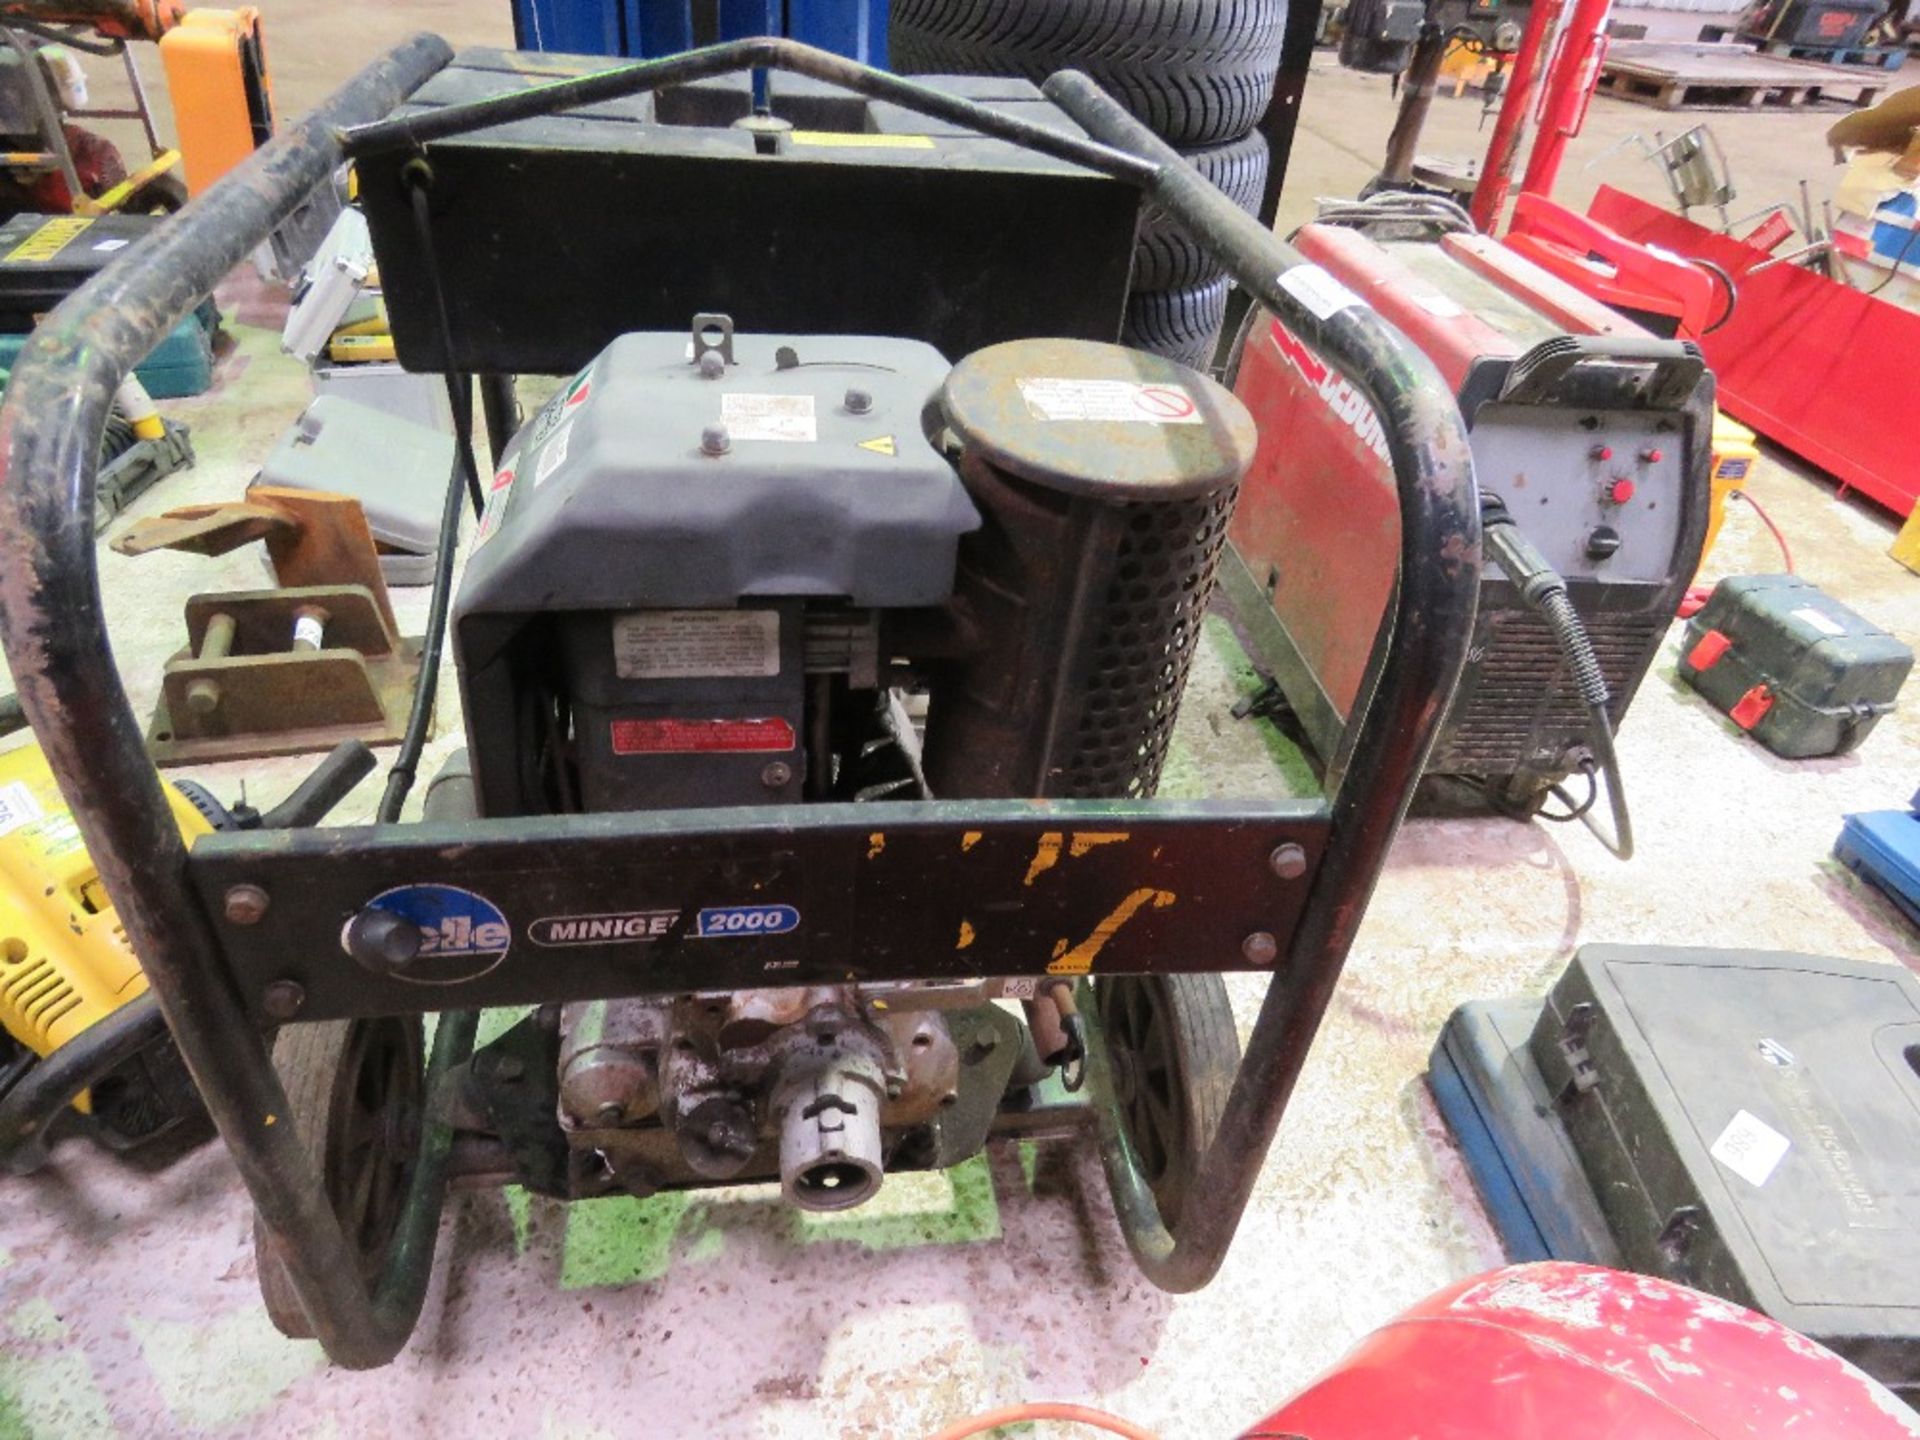 BELLE MINIGEN 2000 LISTER DIESEL ENGINED 5KVA ELECTRIC START DUAL VOLATAGE GENERATOR. ....THIS LOT I - Image 2 of 4